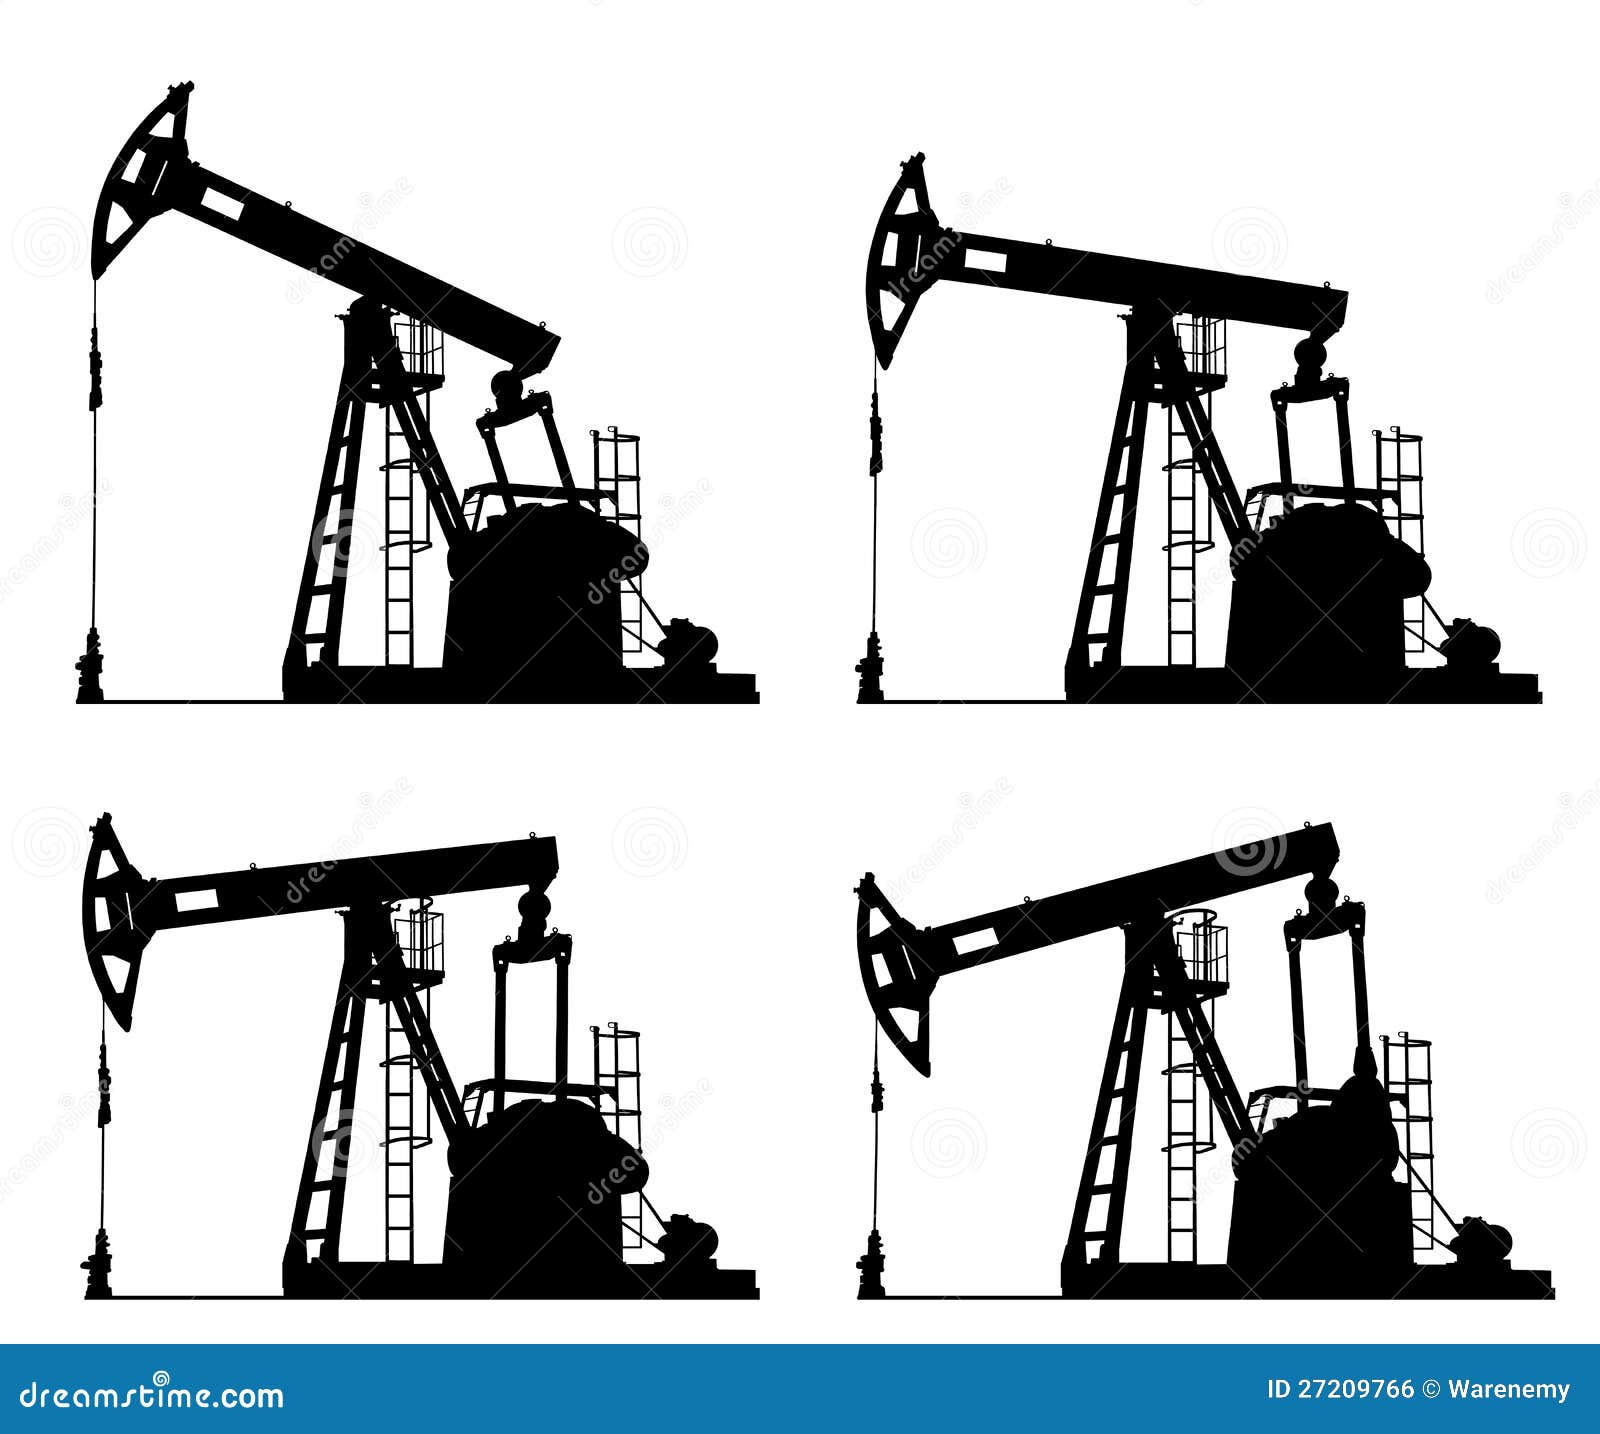 clipart oil well - photo #30